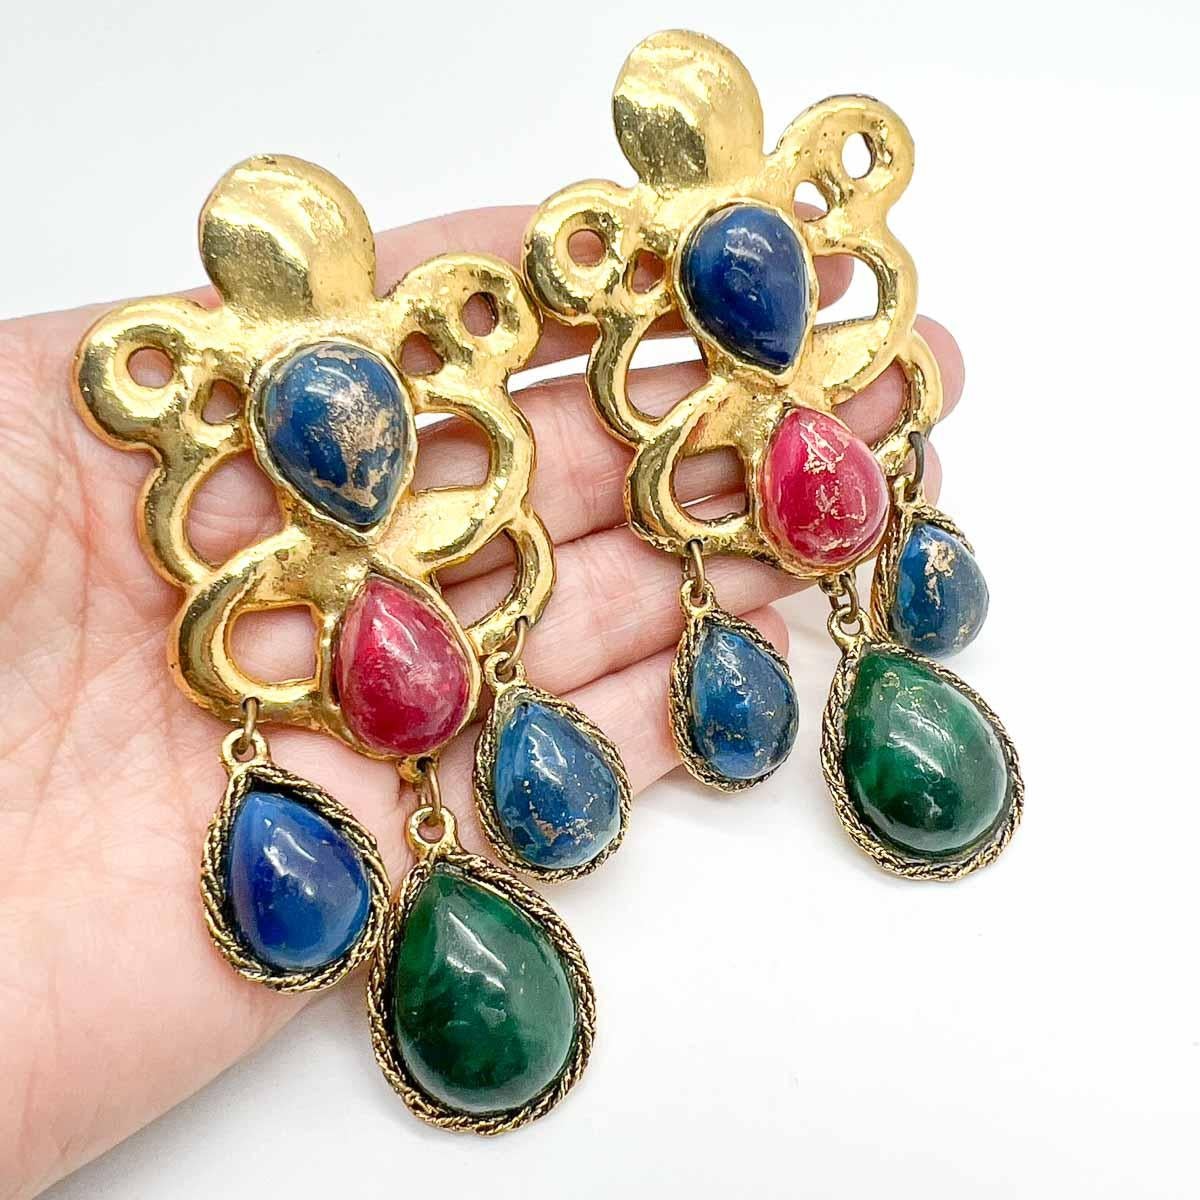 An ultra rare pair of Vintage Ungaro Statement Cabochon Earrings. Grandeur and craftmanship combine to perfection in these one-of-a-kind hand-made earrings. Brushed gold plated metal is set with large, opulent teardrop shaped cabochon glass